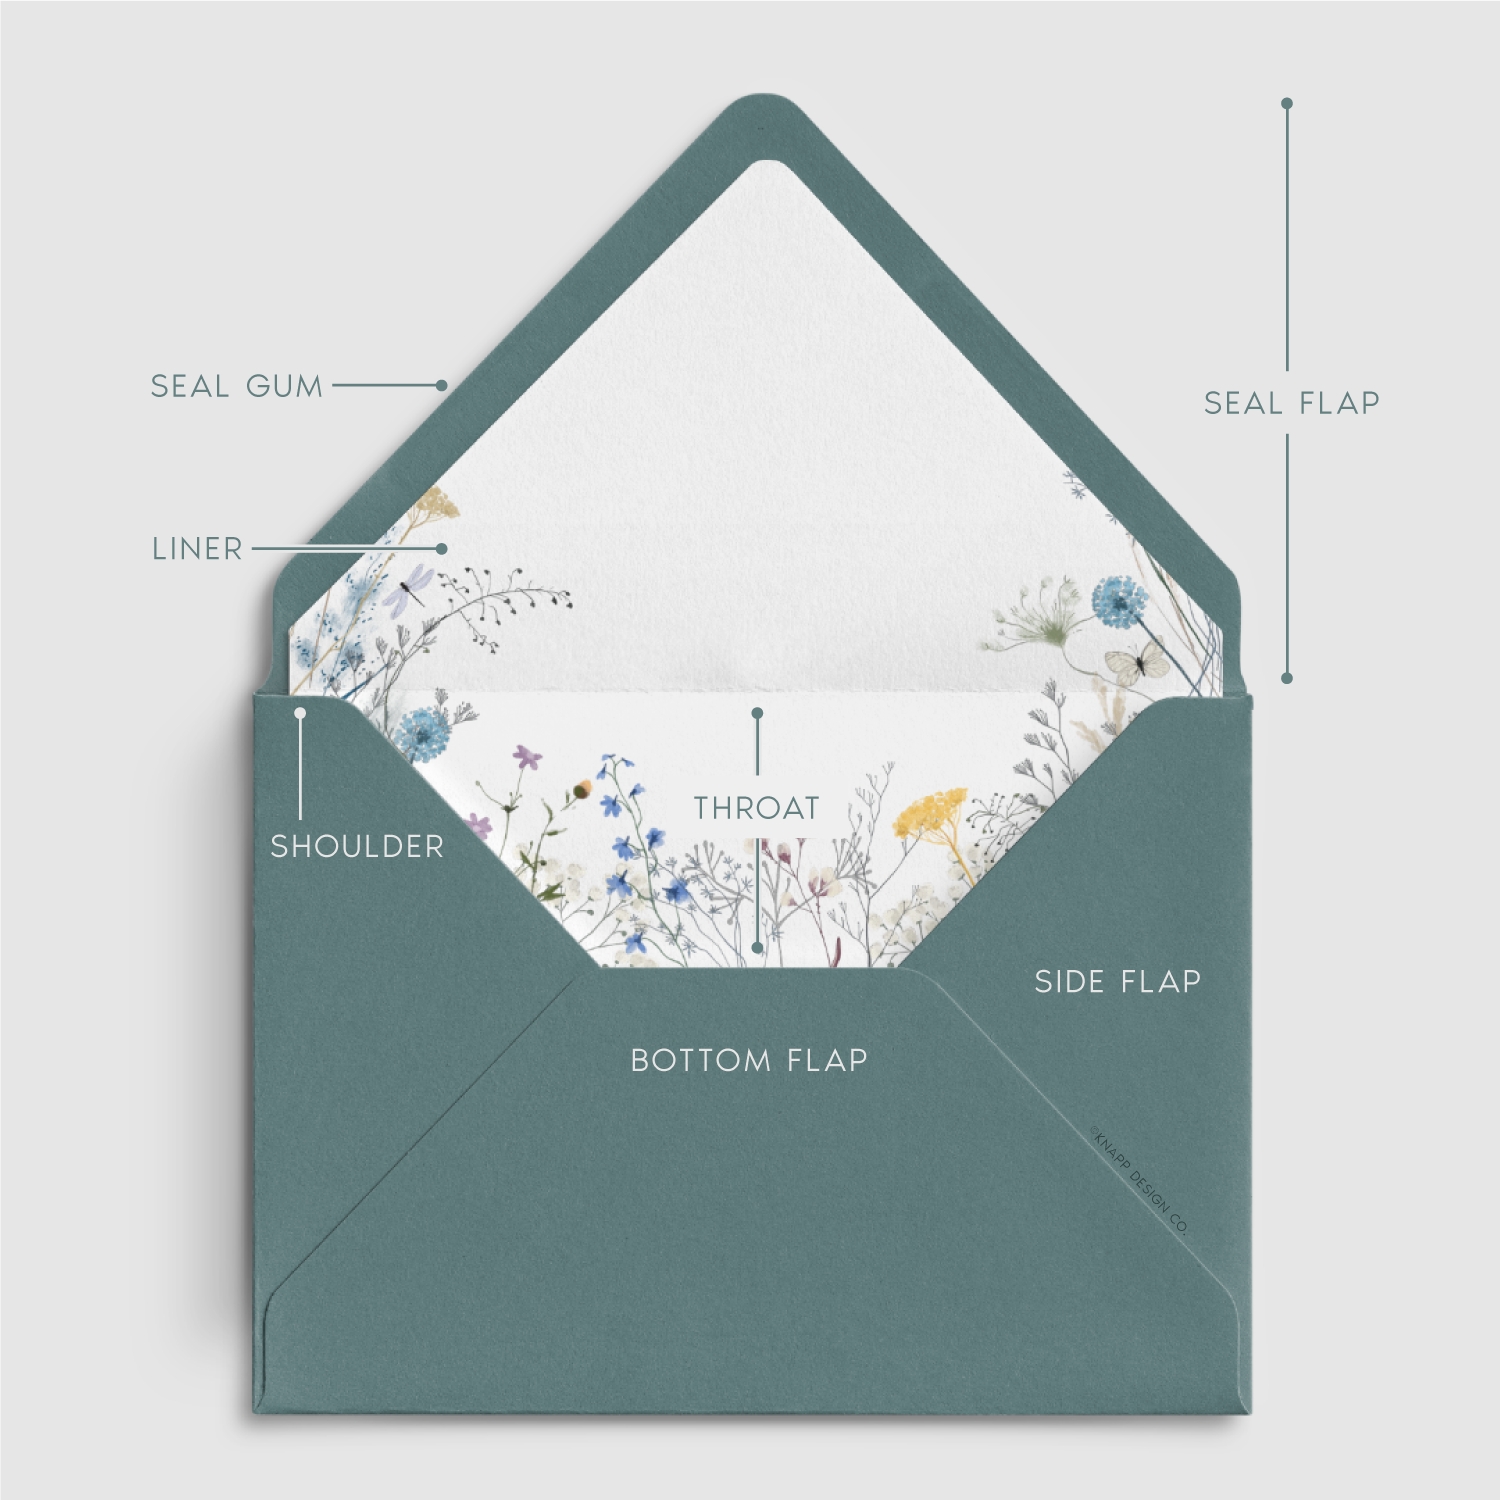 The anatomy of an envelope - we know you were dying to know!